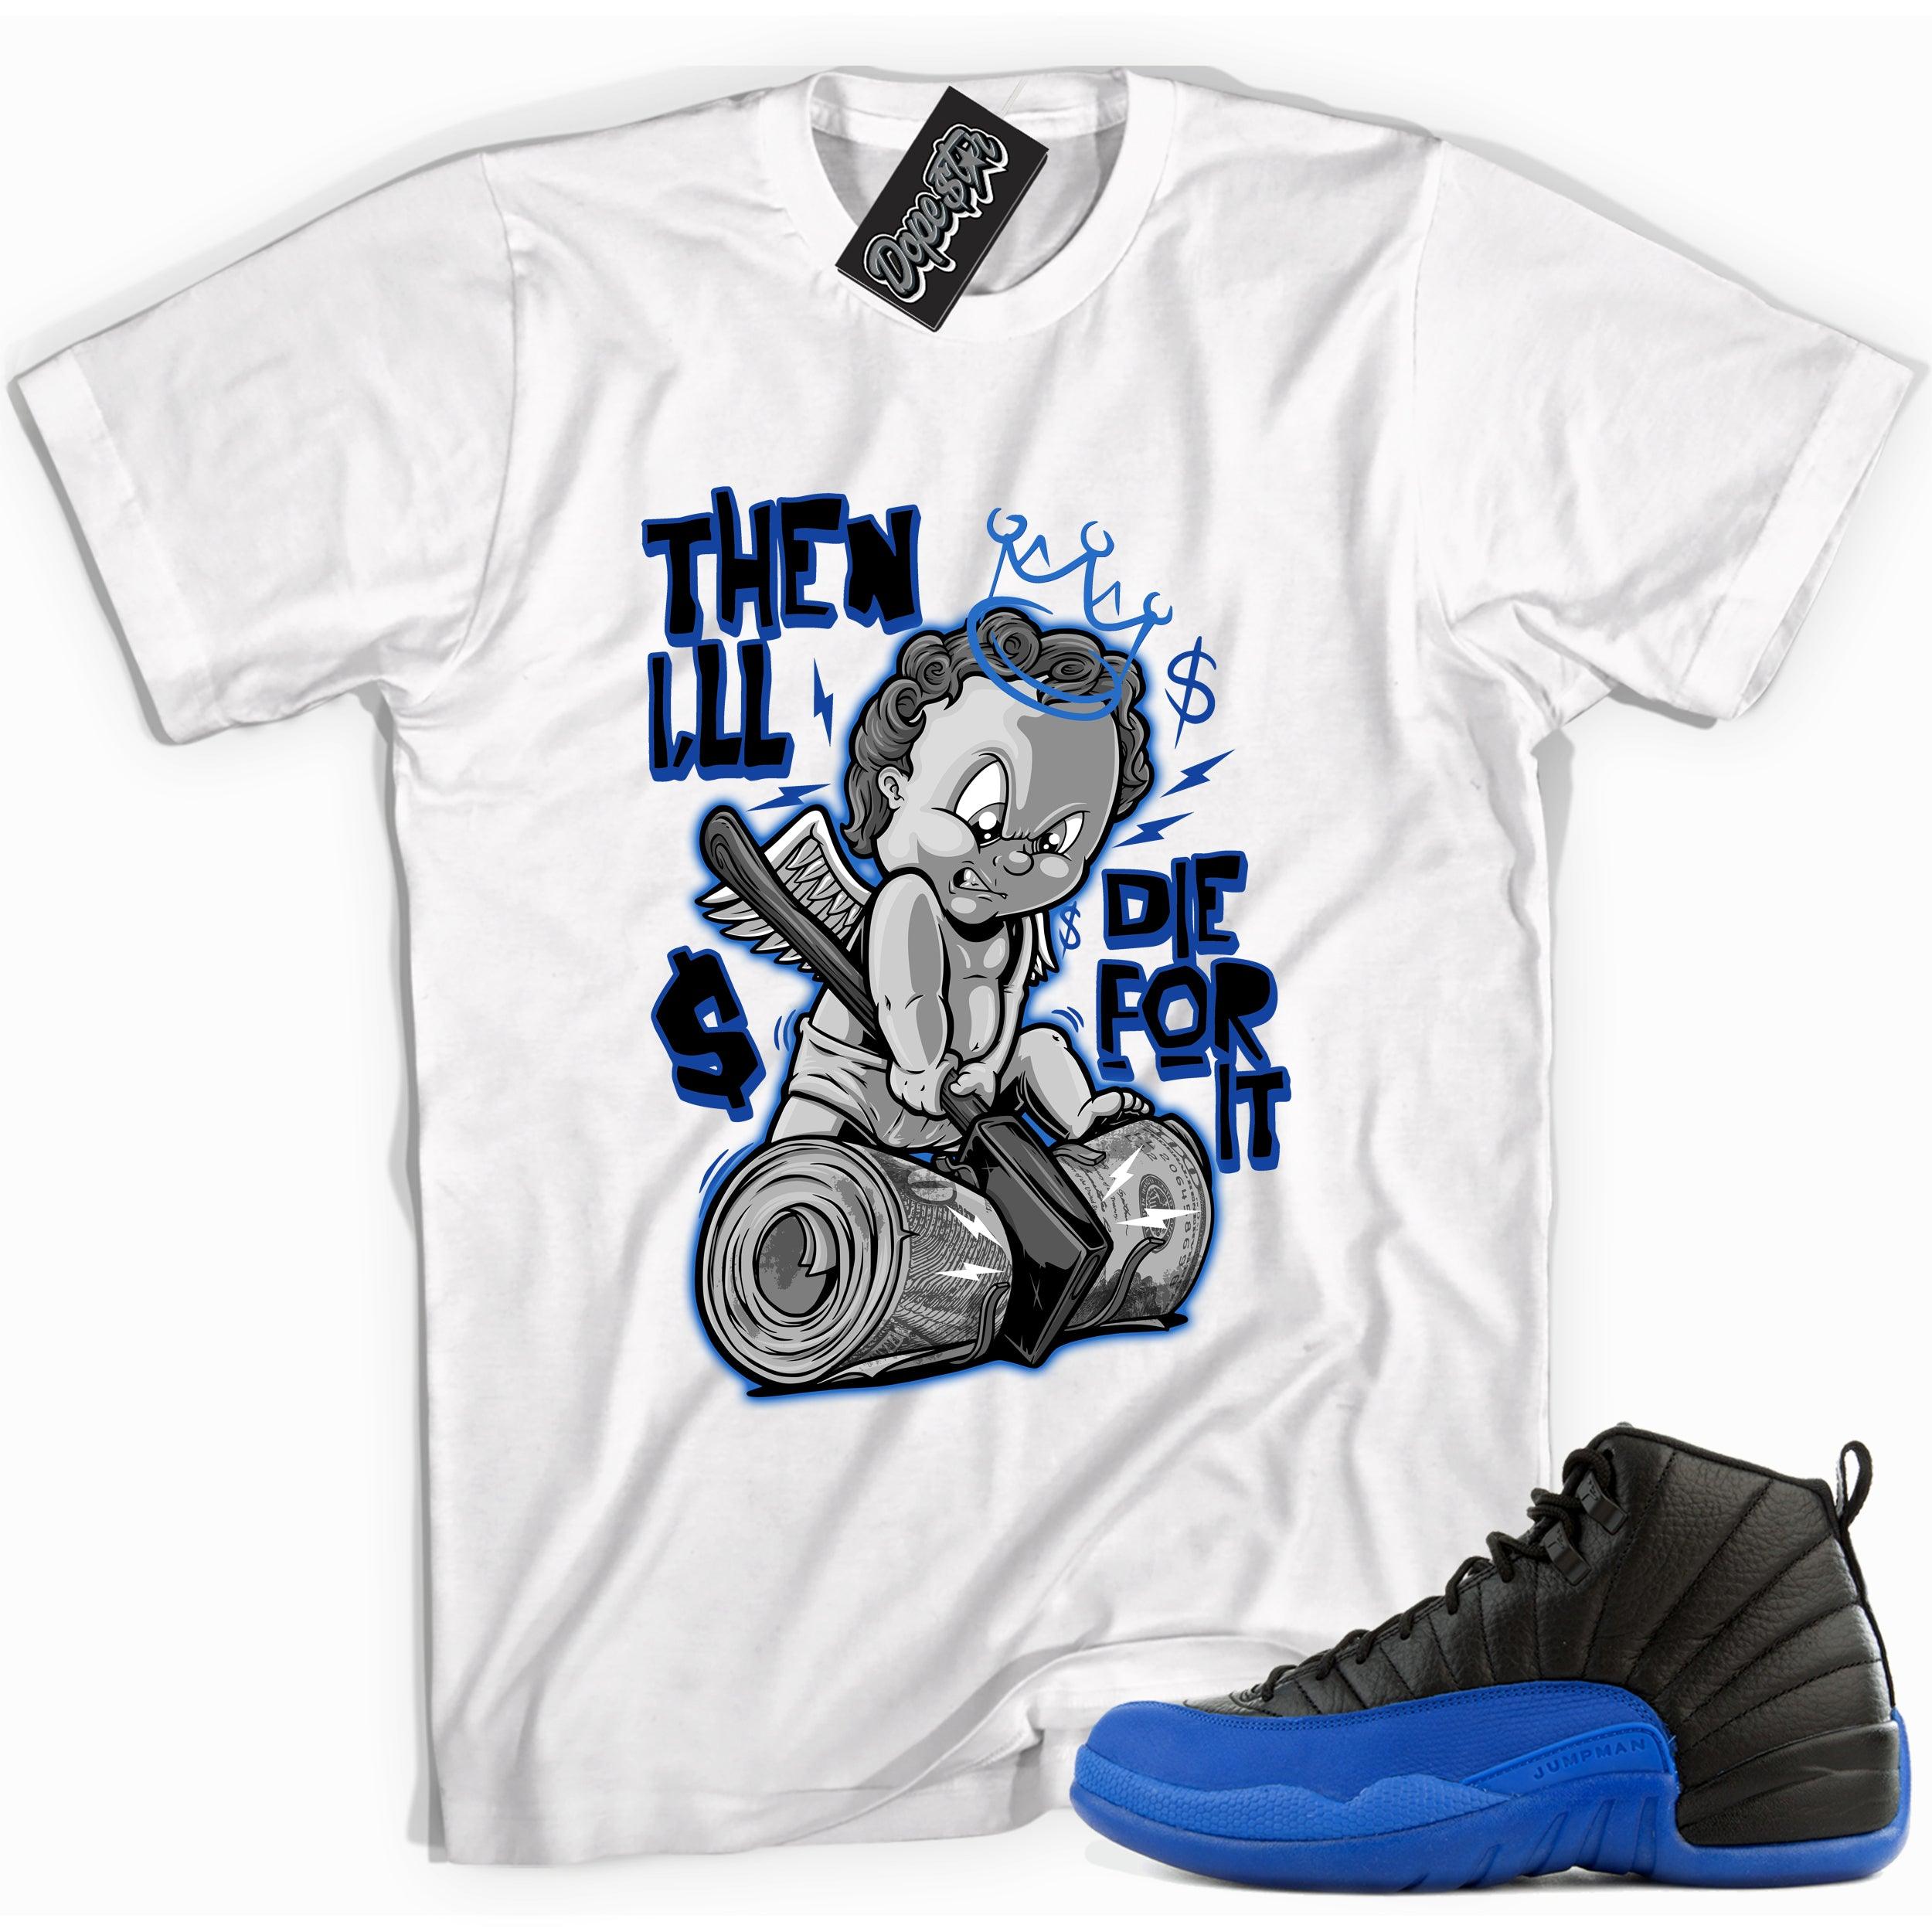 Cool white graphic tee with 'ill die for it' print, that perfectly matches Air Jordan 12 Retro Black Game Royal sneakers.